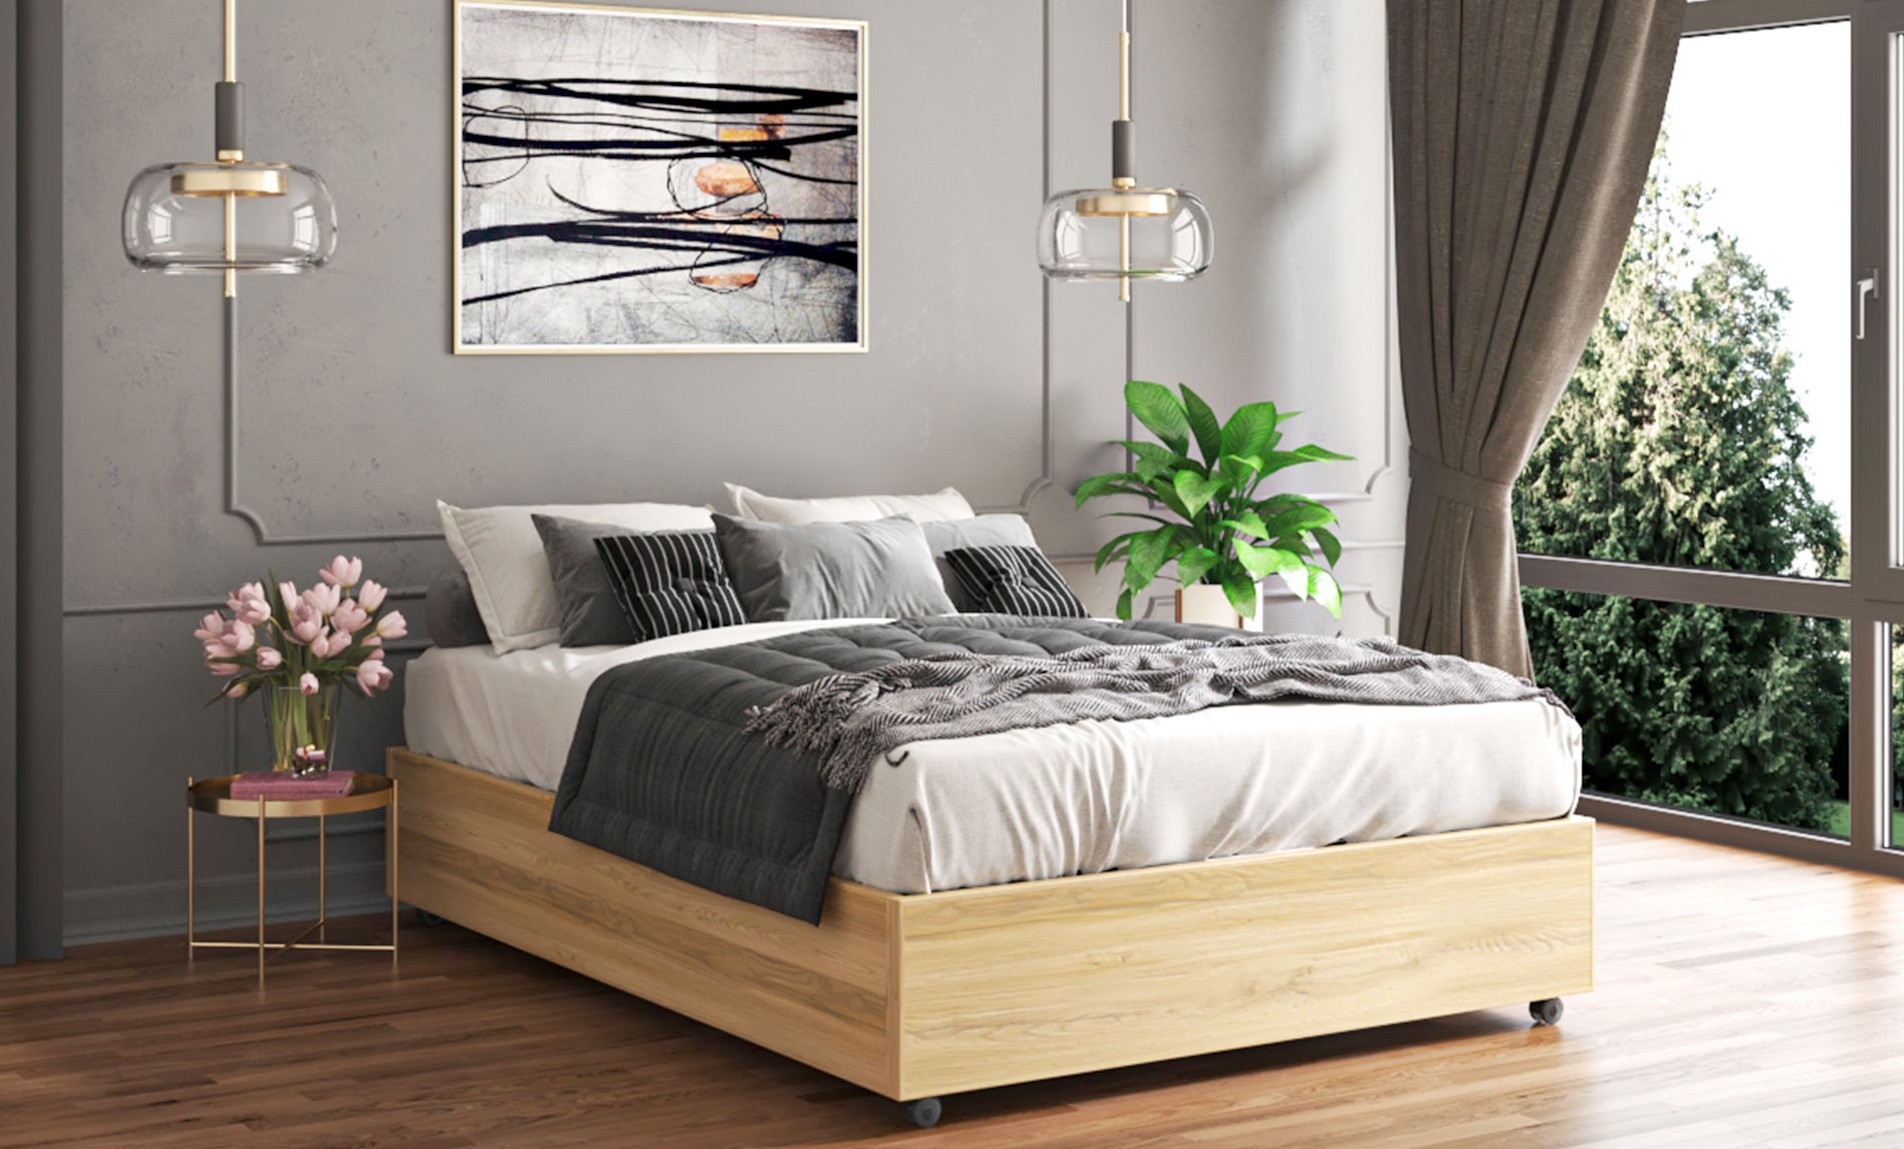 Back to nature. The warmth of wood into your bedroom.